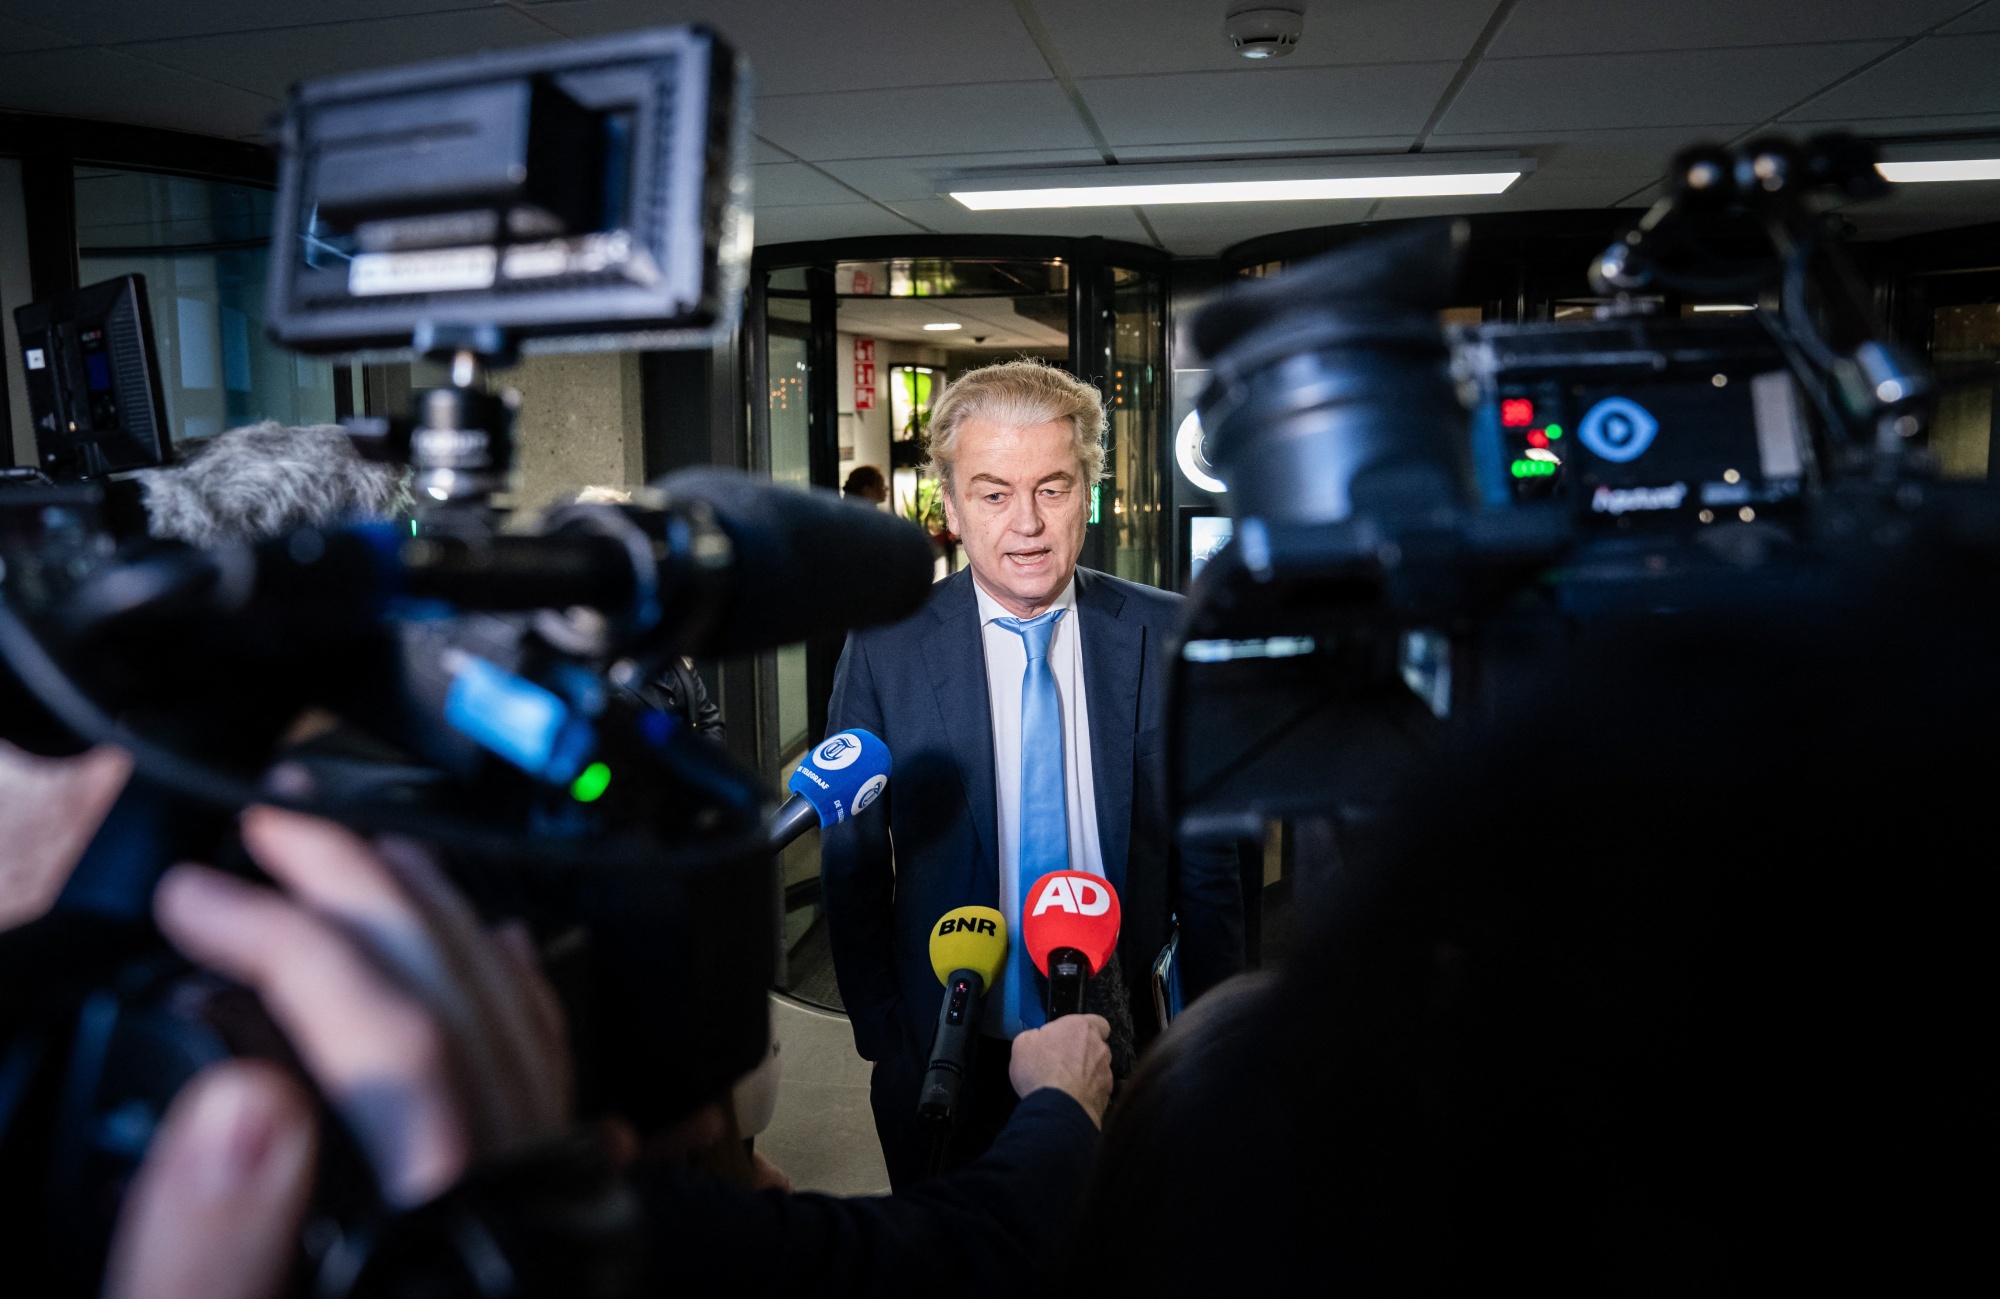 Geert Wilders arrives at the House of Representatives in The Hague on March 14.